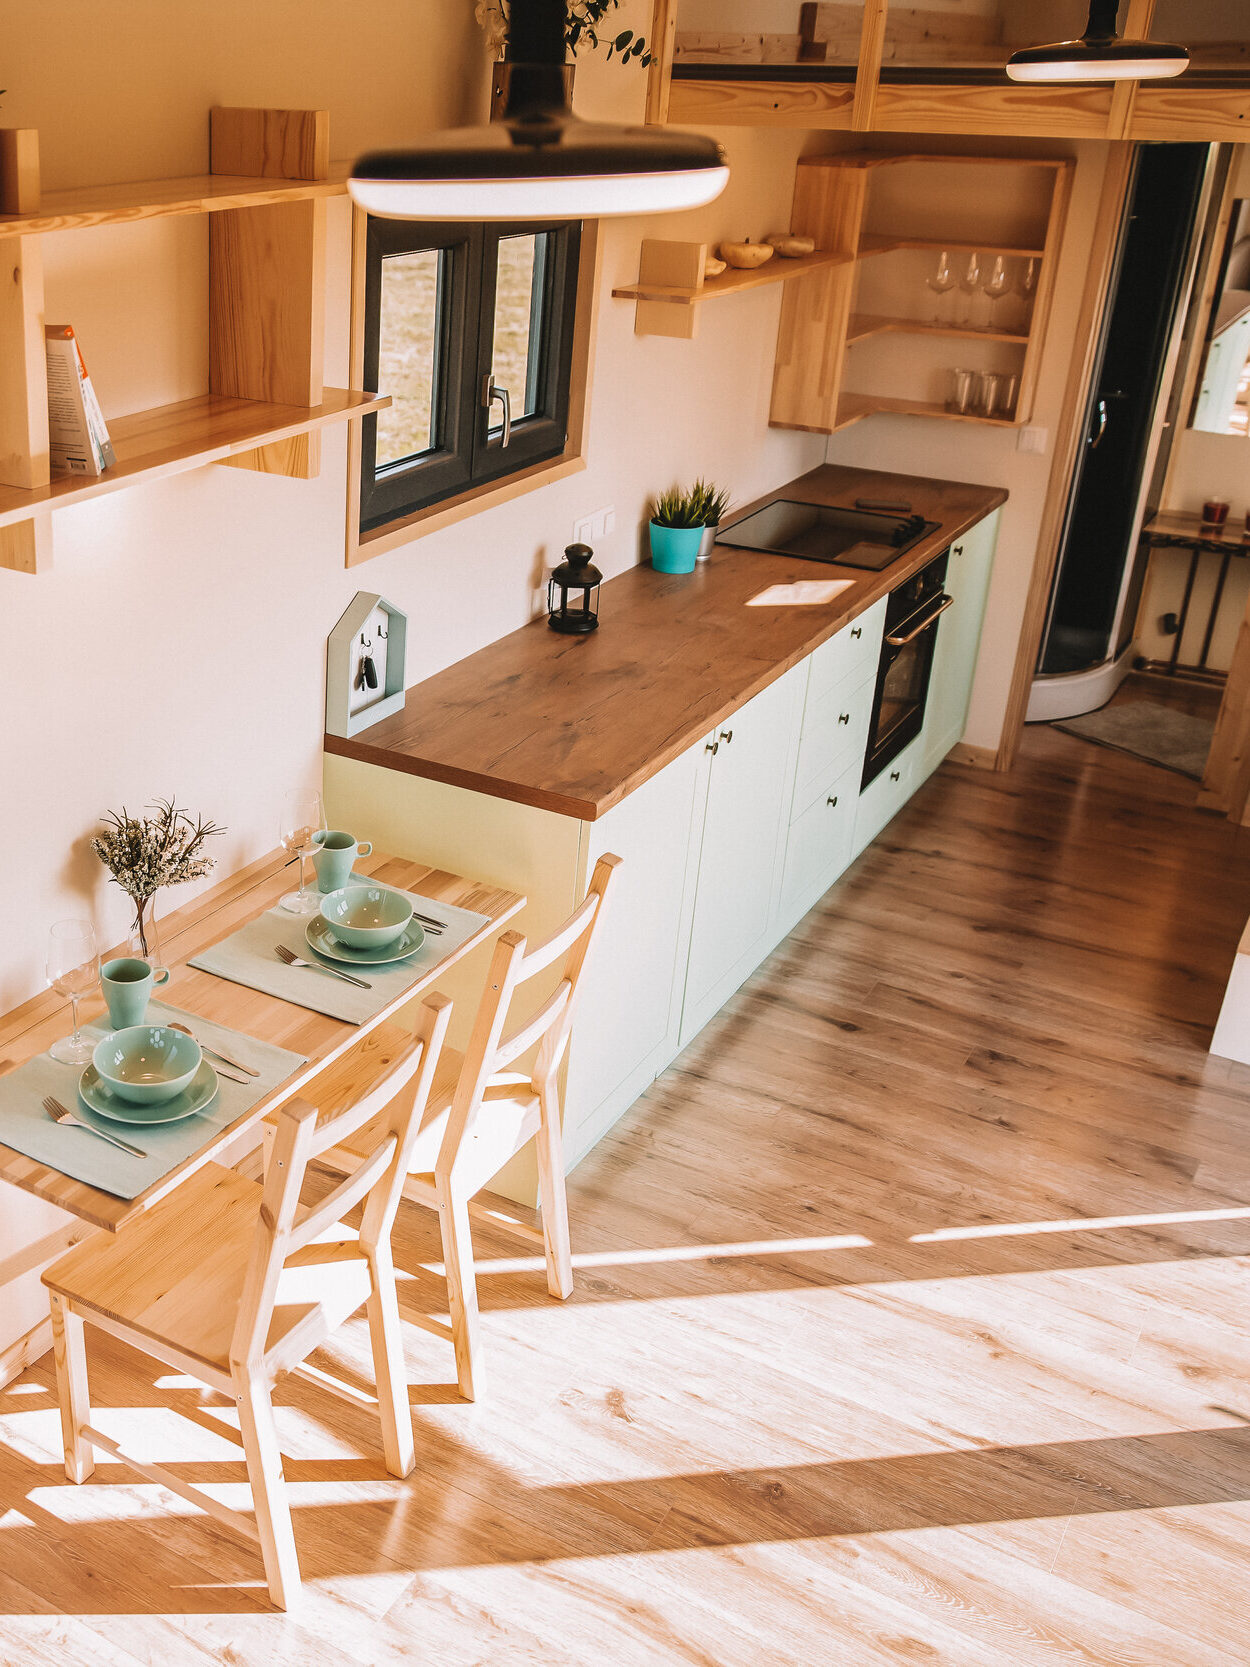 6 Spectacular Tiny Home Interior Design Models You'll Love! - United Tiny  Homes